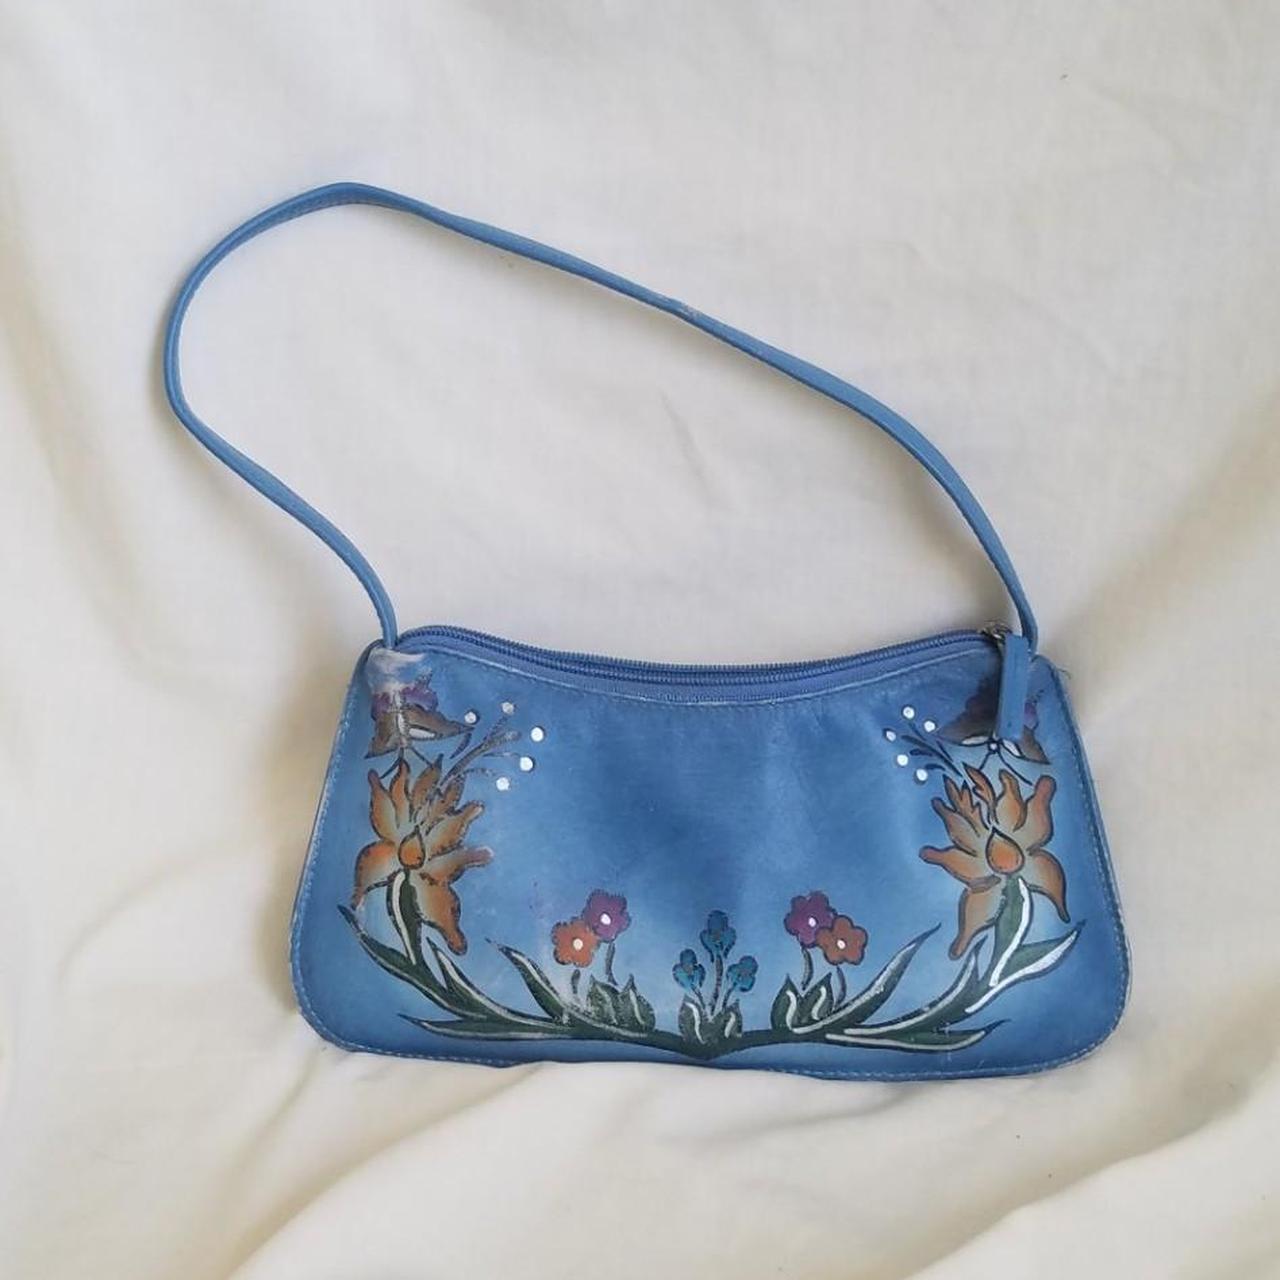 DIOR Embroidered Saddle Bag Leather & Linen Floral Butterflies